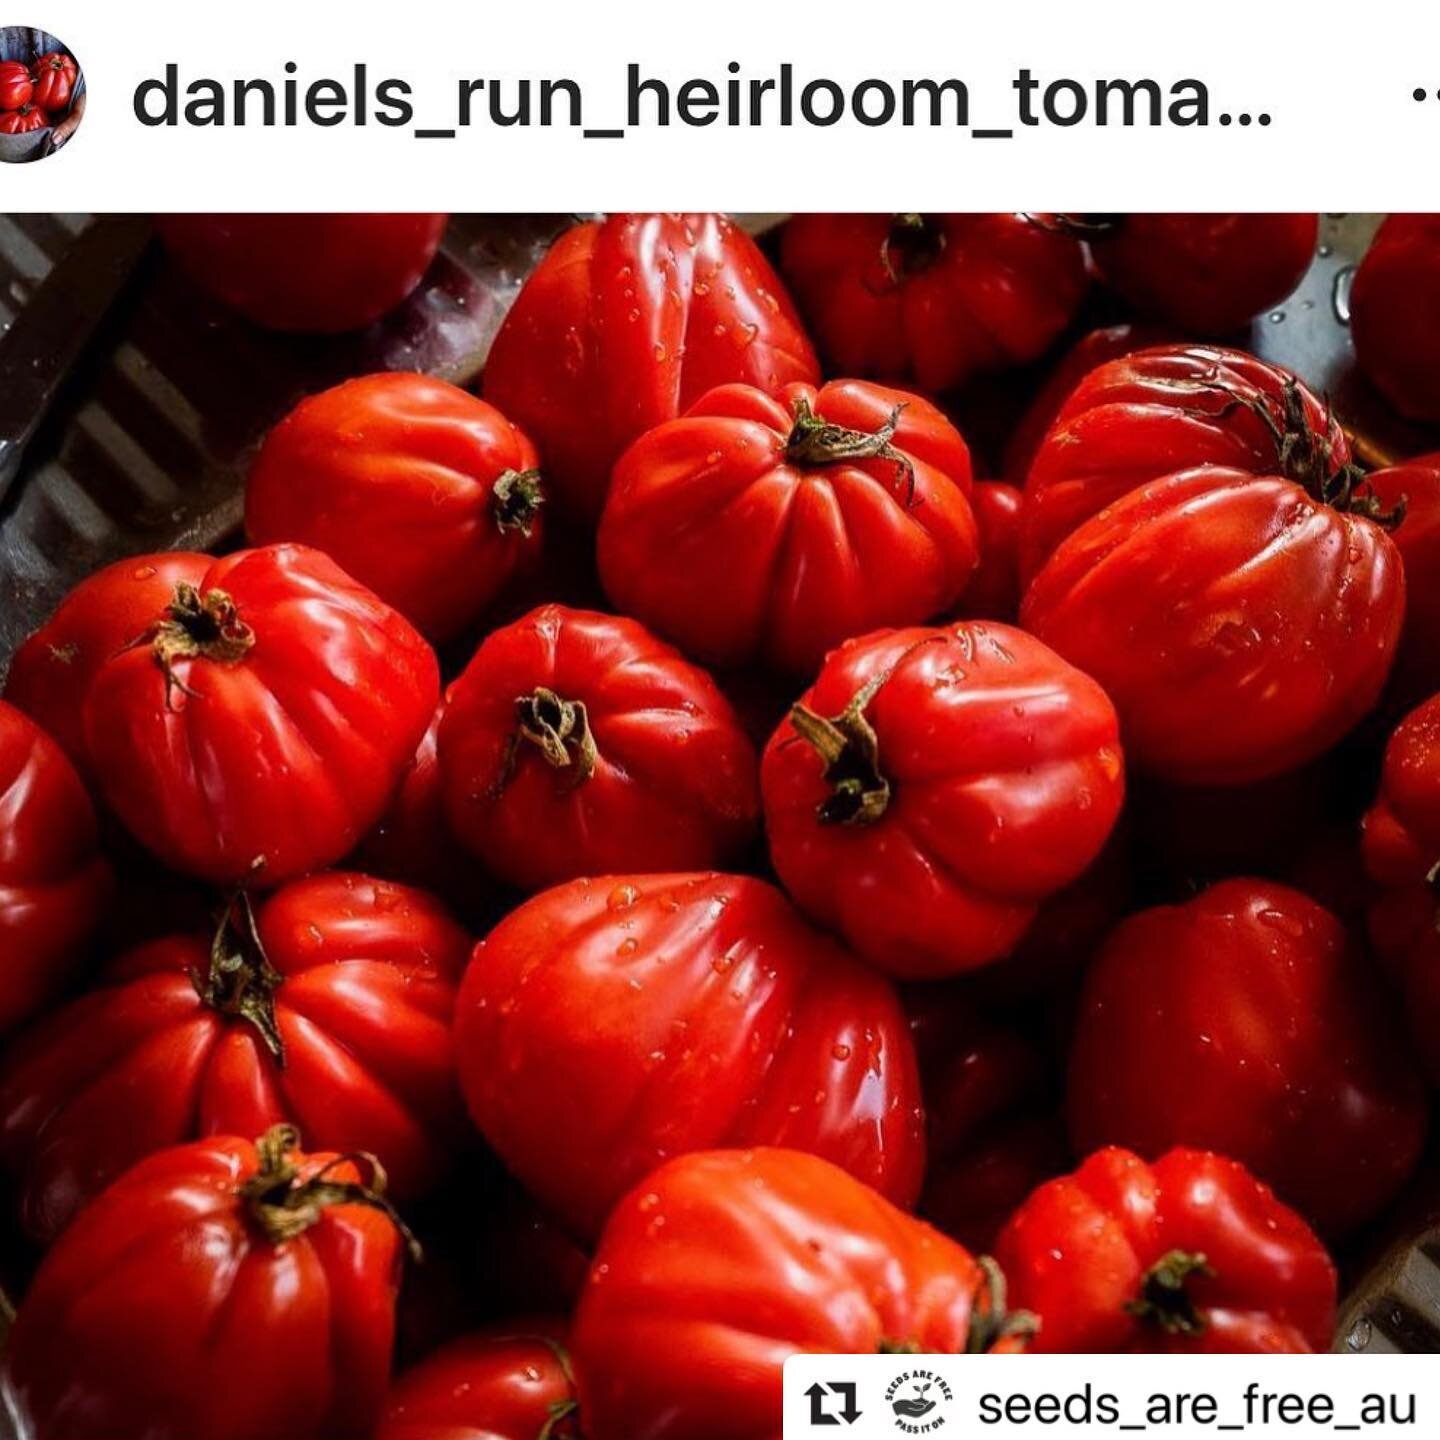 #Repost @seeds_are_free_au with @make_repost
If you are budding garden enthusiast make sure you sign up for @seeds_are_free_au 
・・・
A SPECIAL SURPRISE🍅 The first tomato variety to be sent is a very special gift from my gorgeous friend @daniels_run_h